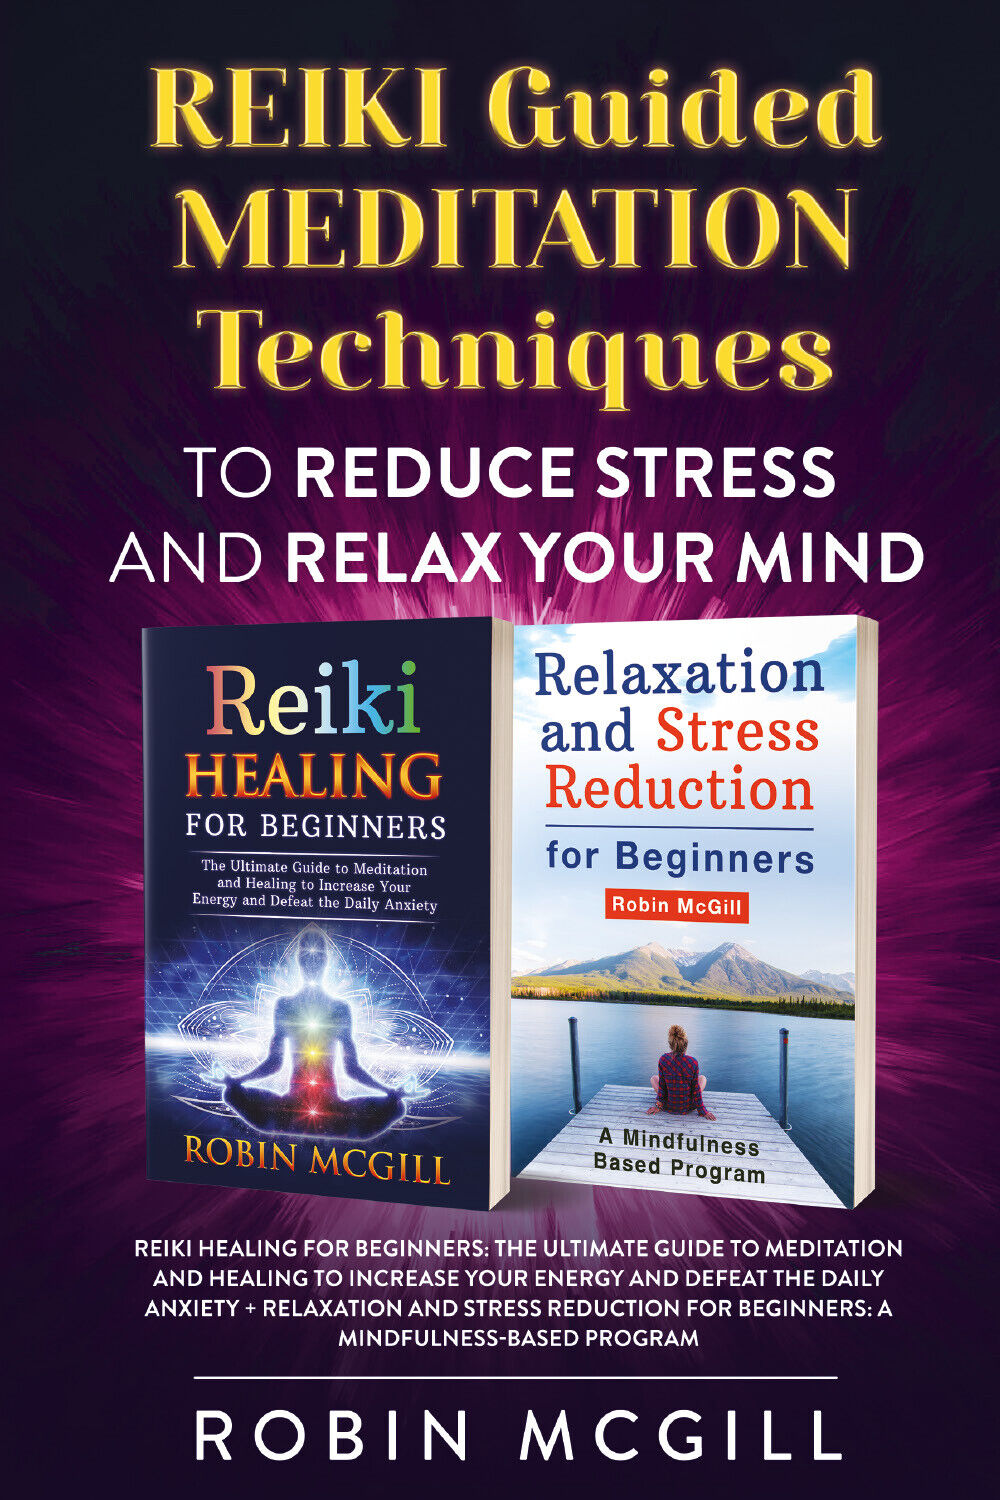 REIKI Guided Meditation Techniques to Reduce Stress and Relax Your Mind di Robin libro usato